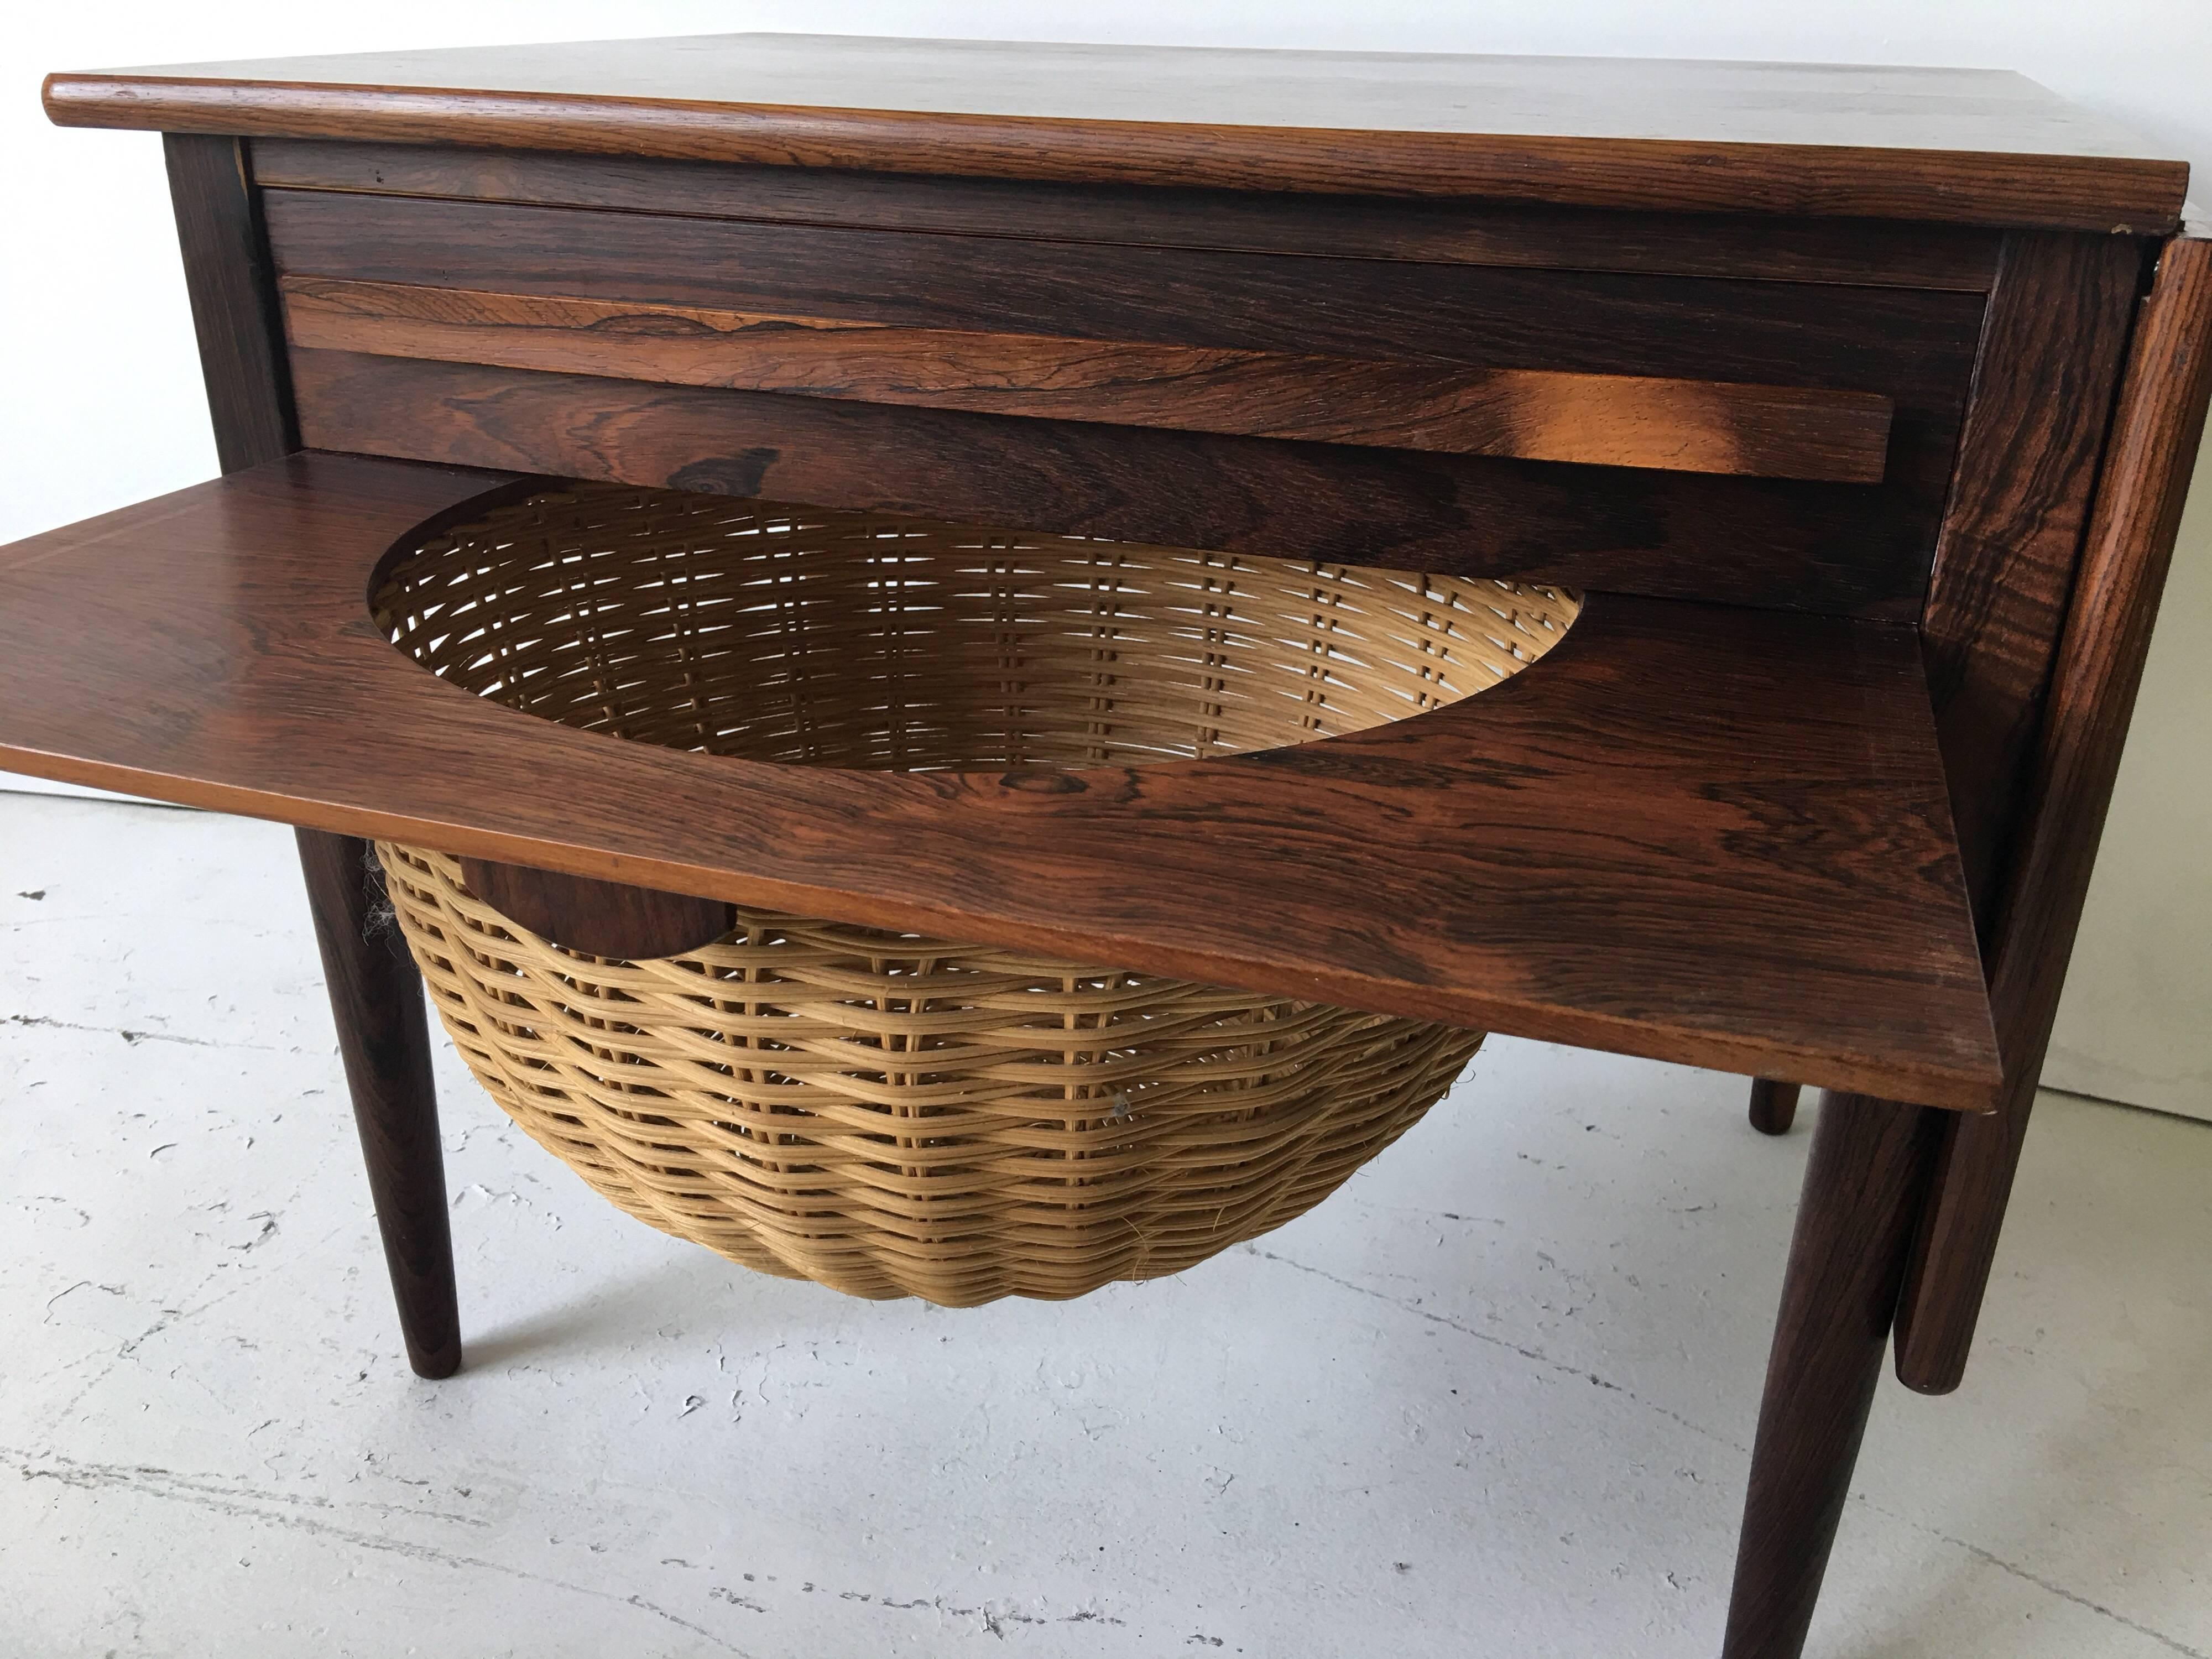 What a great versatile piece! This vintage rosewood sewing table features a drop-leaf that flips up and slides sideways making the top 36